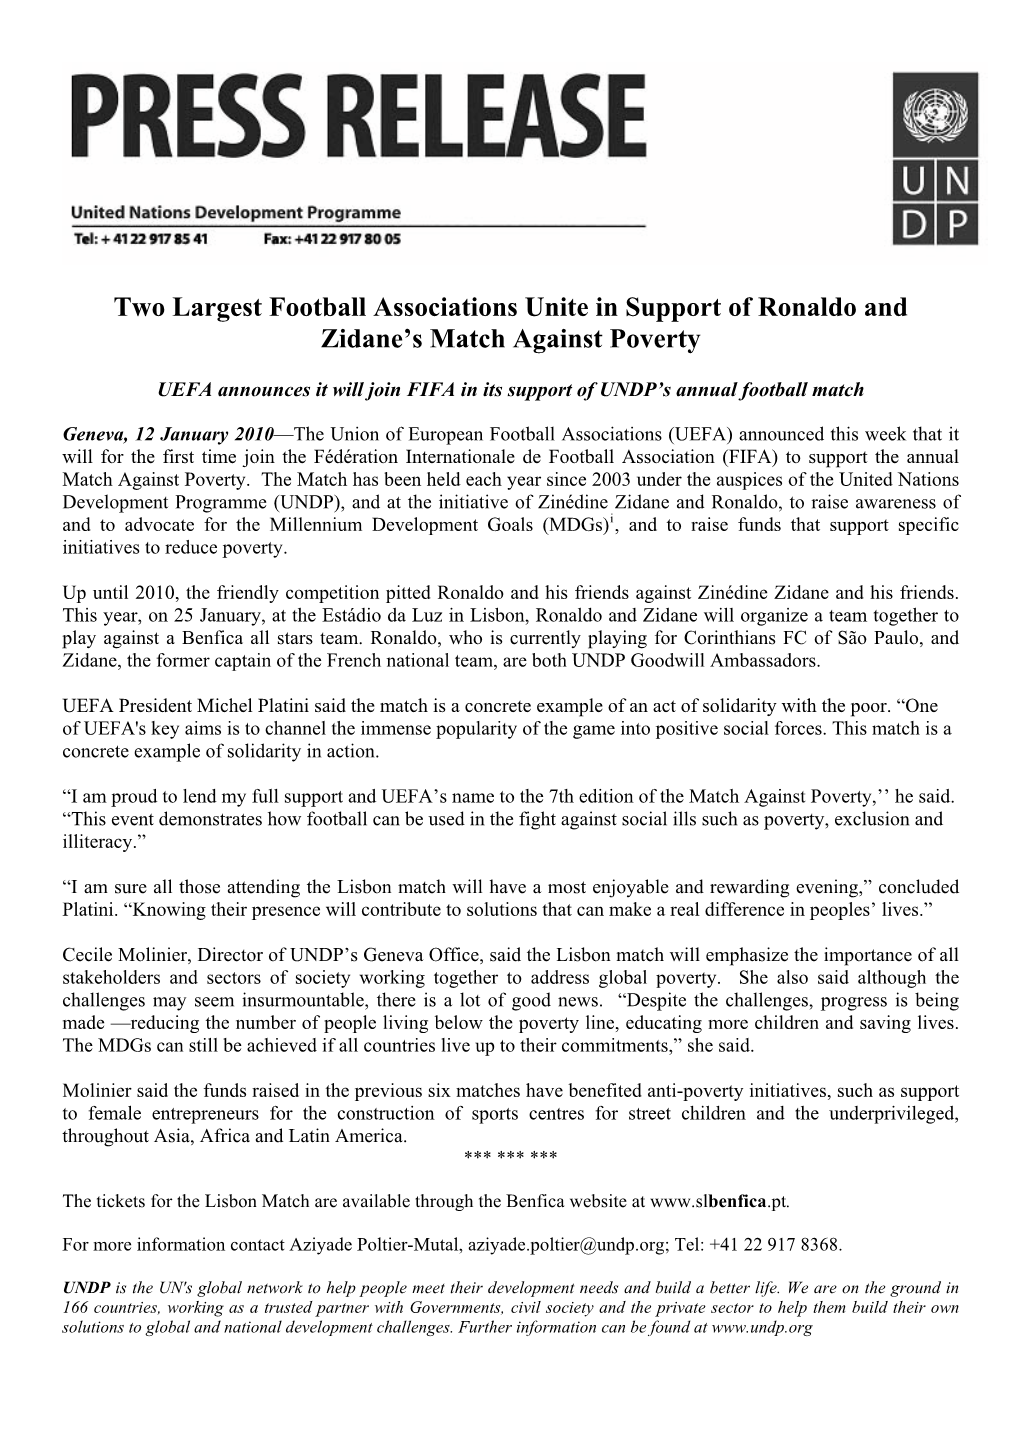 Two Largest Football Associations Unite in Support of Ronaldo and Zidane’S Match Against Poverty